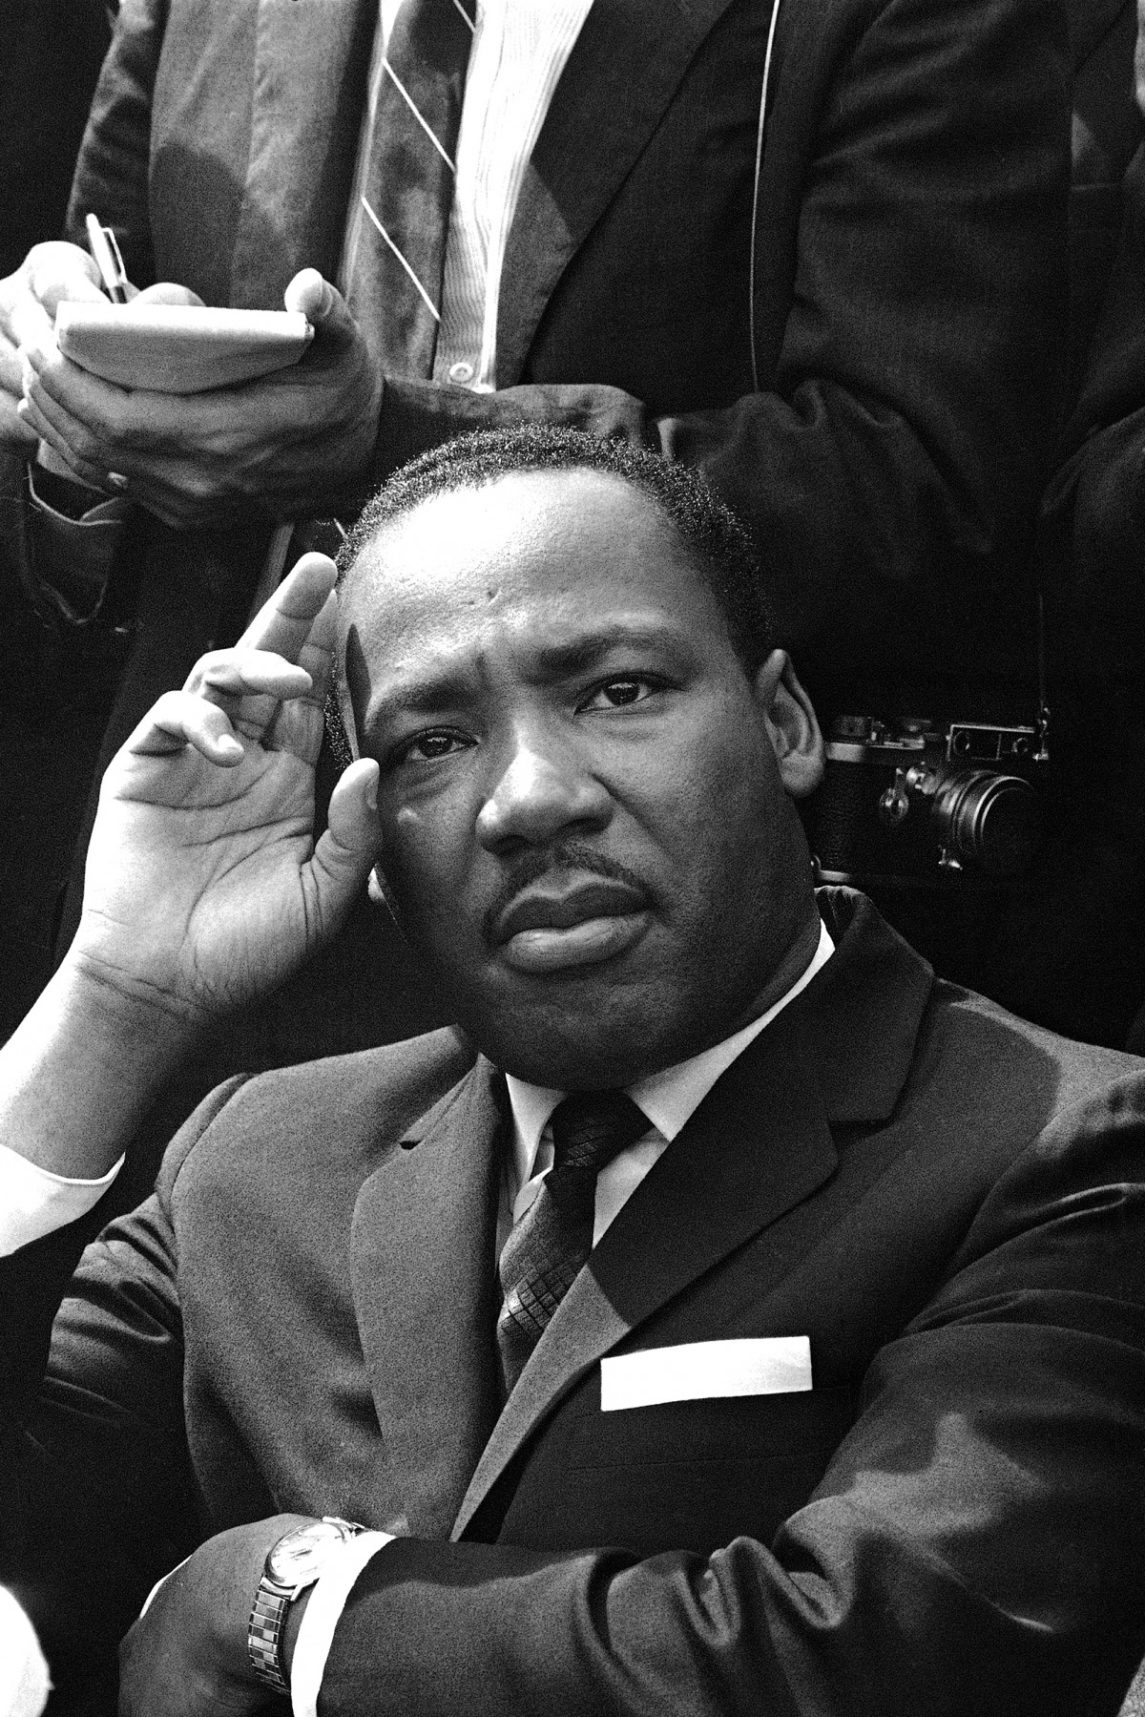 Obama And The Black Community: Are We Closer To Realizing Dr. King’s Dream?